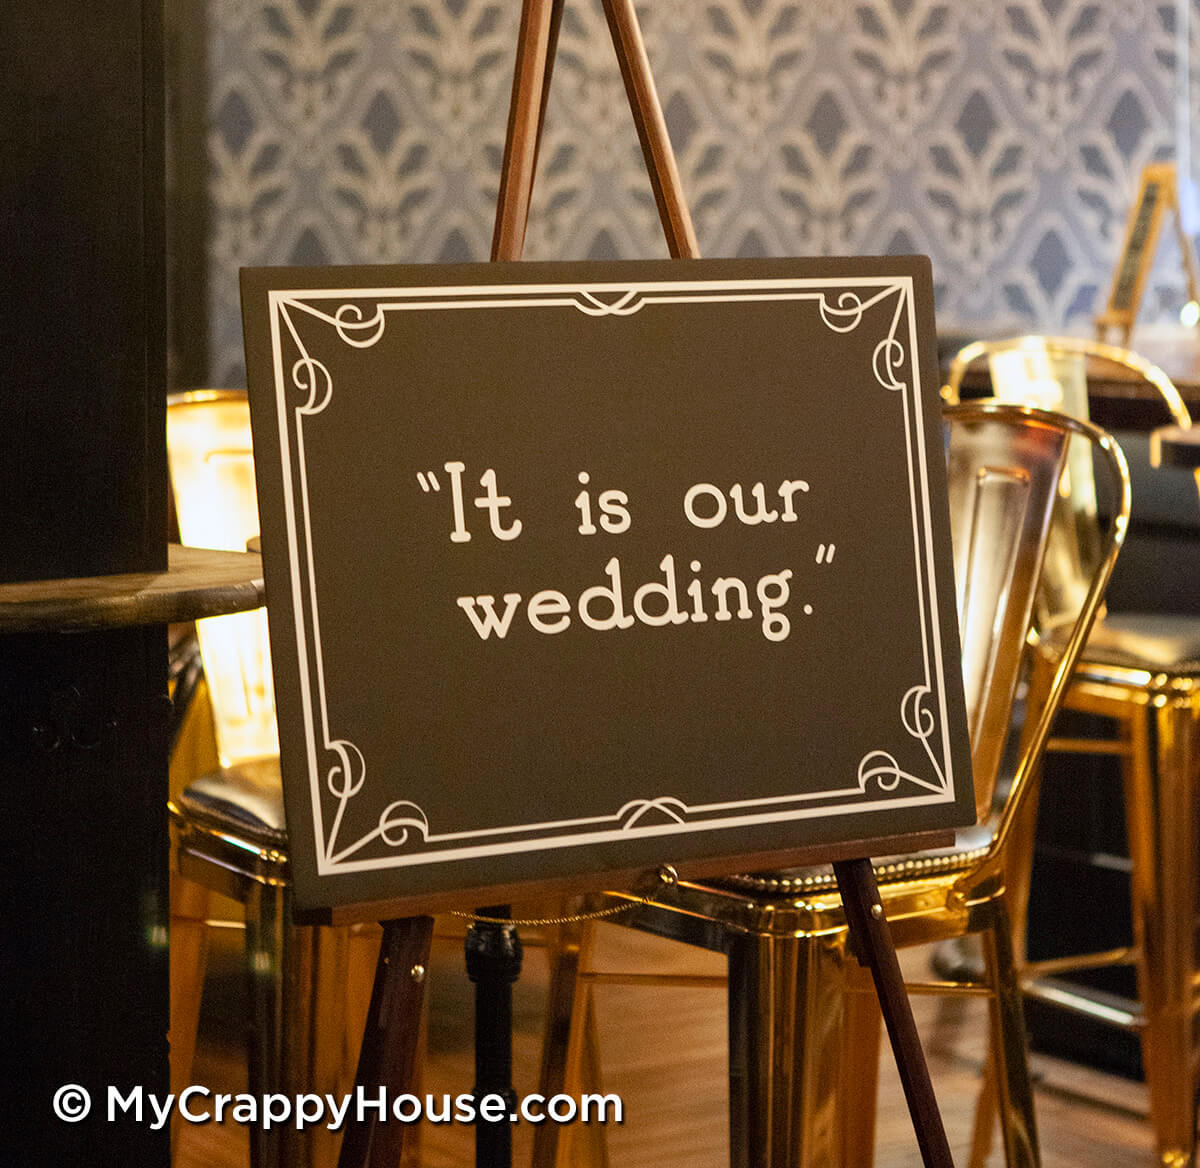 a 1920s style sign saying "it is our wedding"